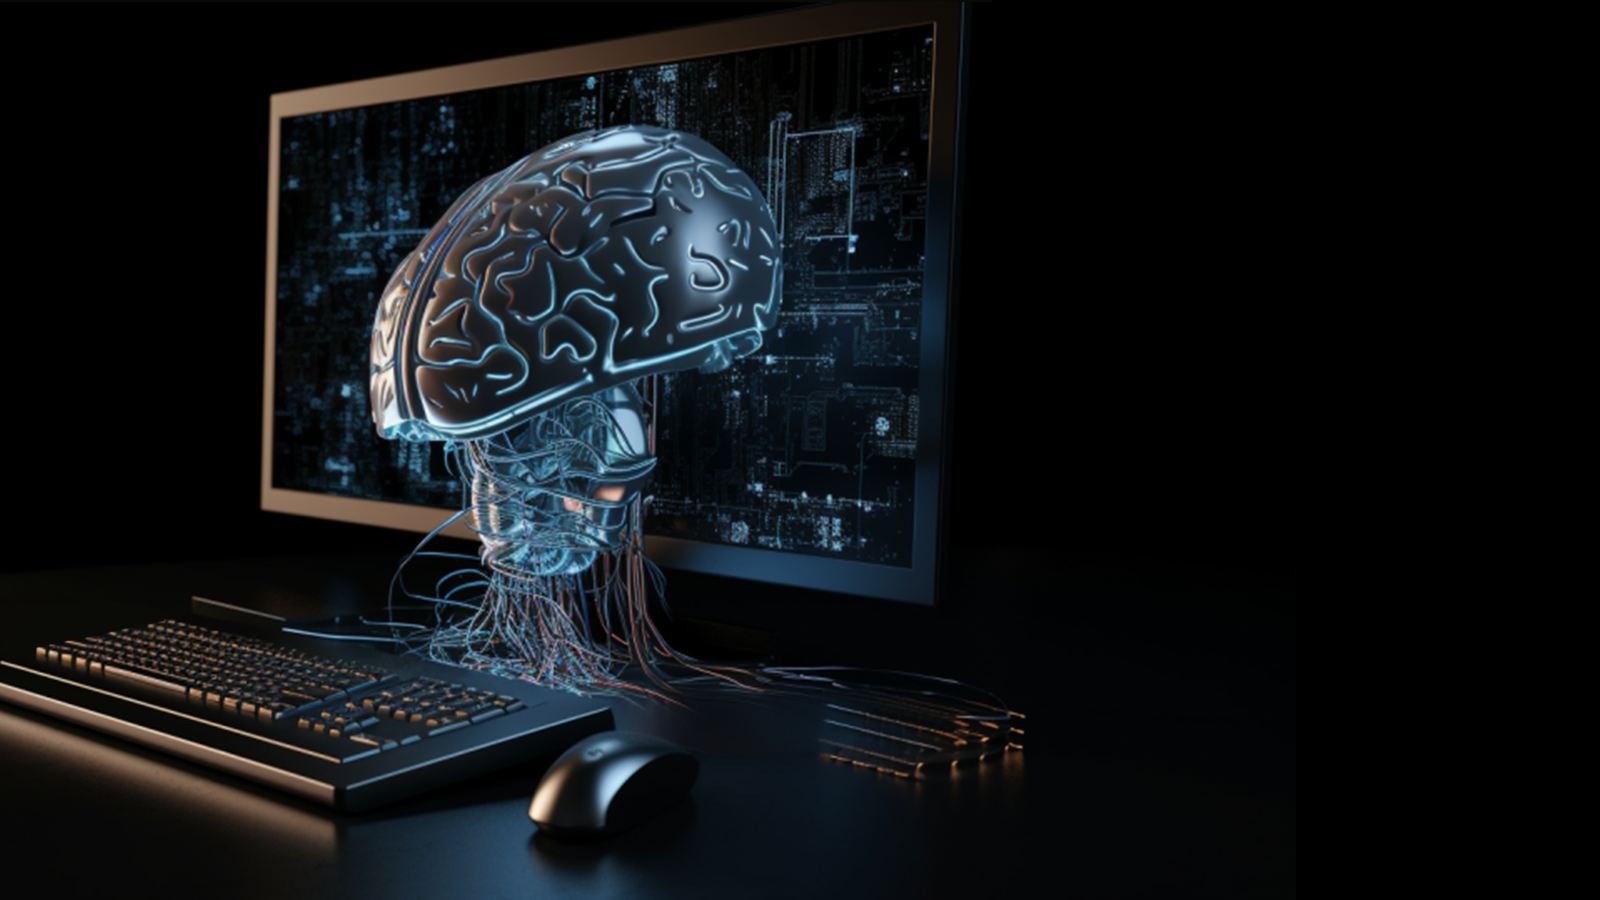 Against a black background, there is a keyboard, a mouse and a computer screen in front of which a brain is connected to multiple wires to represent artificial intelligence